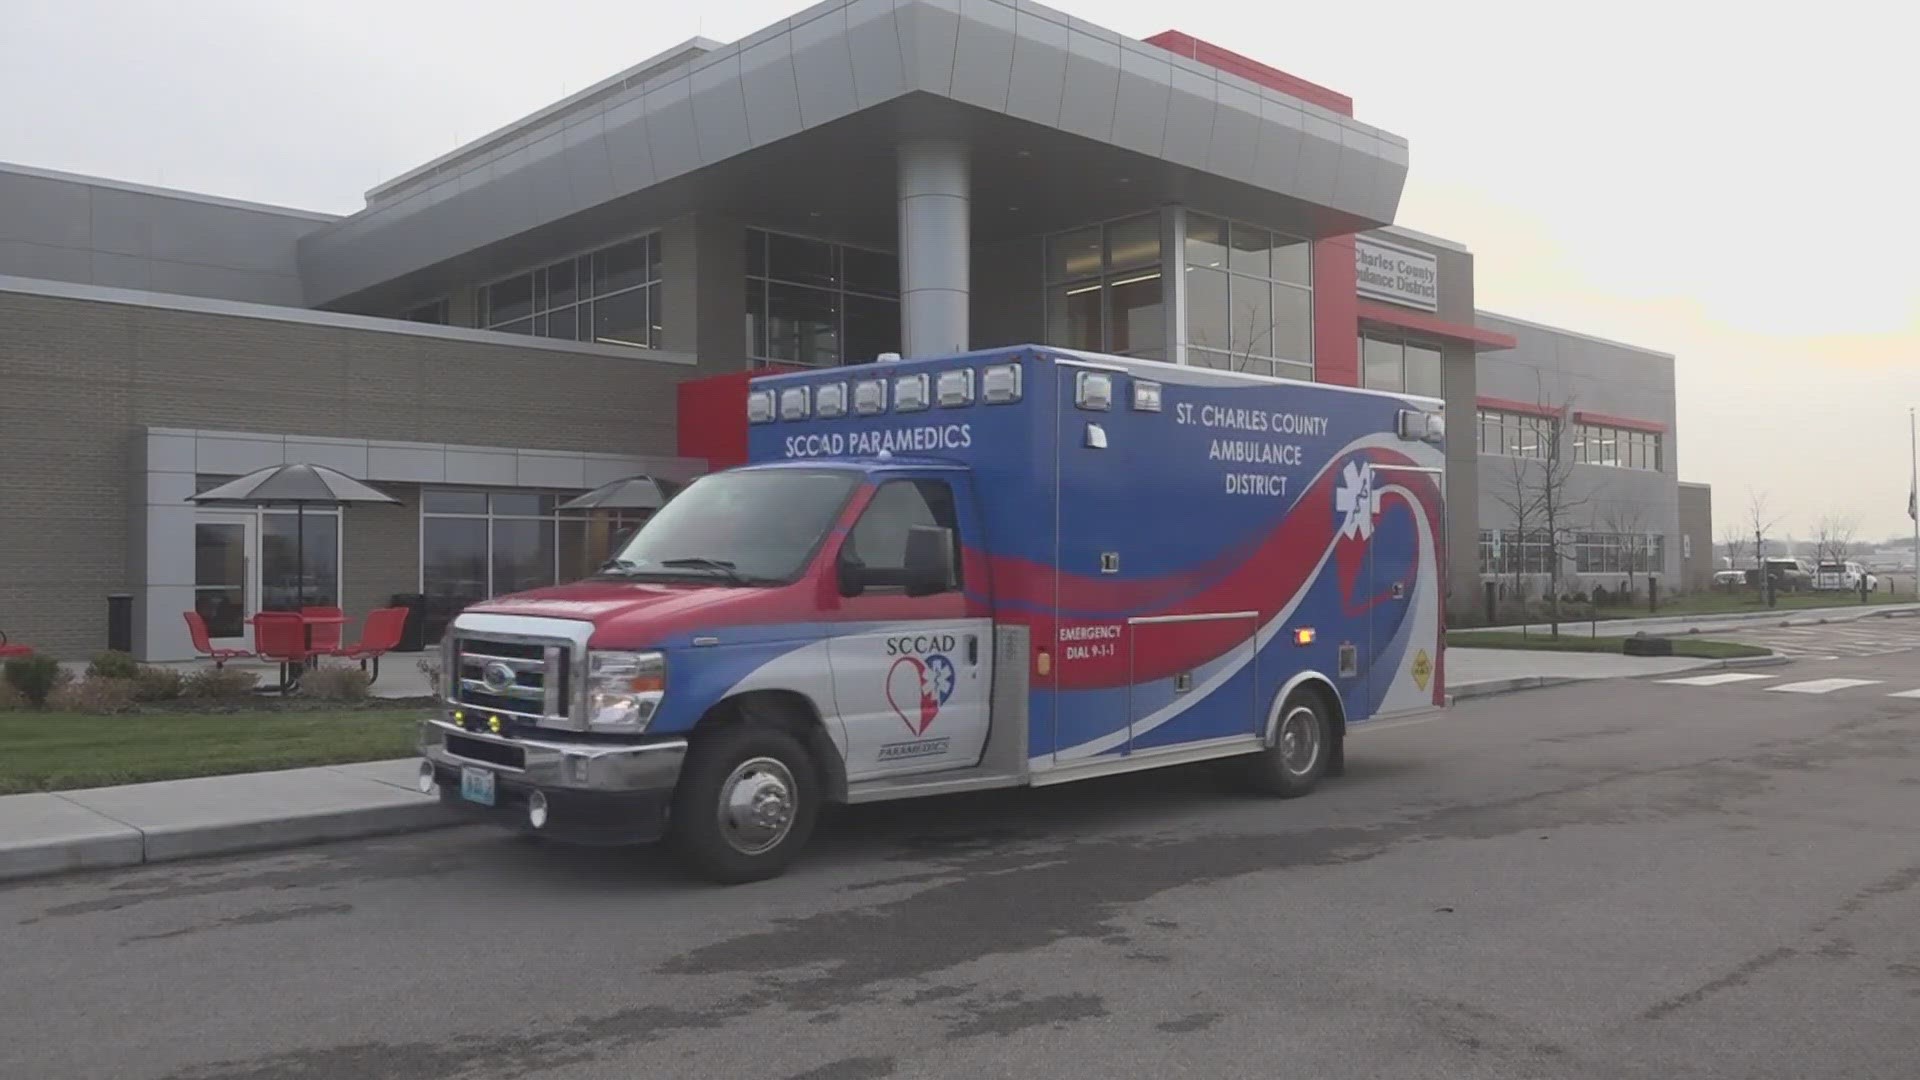 Thanks to a $1.5 million grant, the ambulance district can now offer users immediate withdrawal relief. They hope to roll out the new treatment in October.